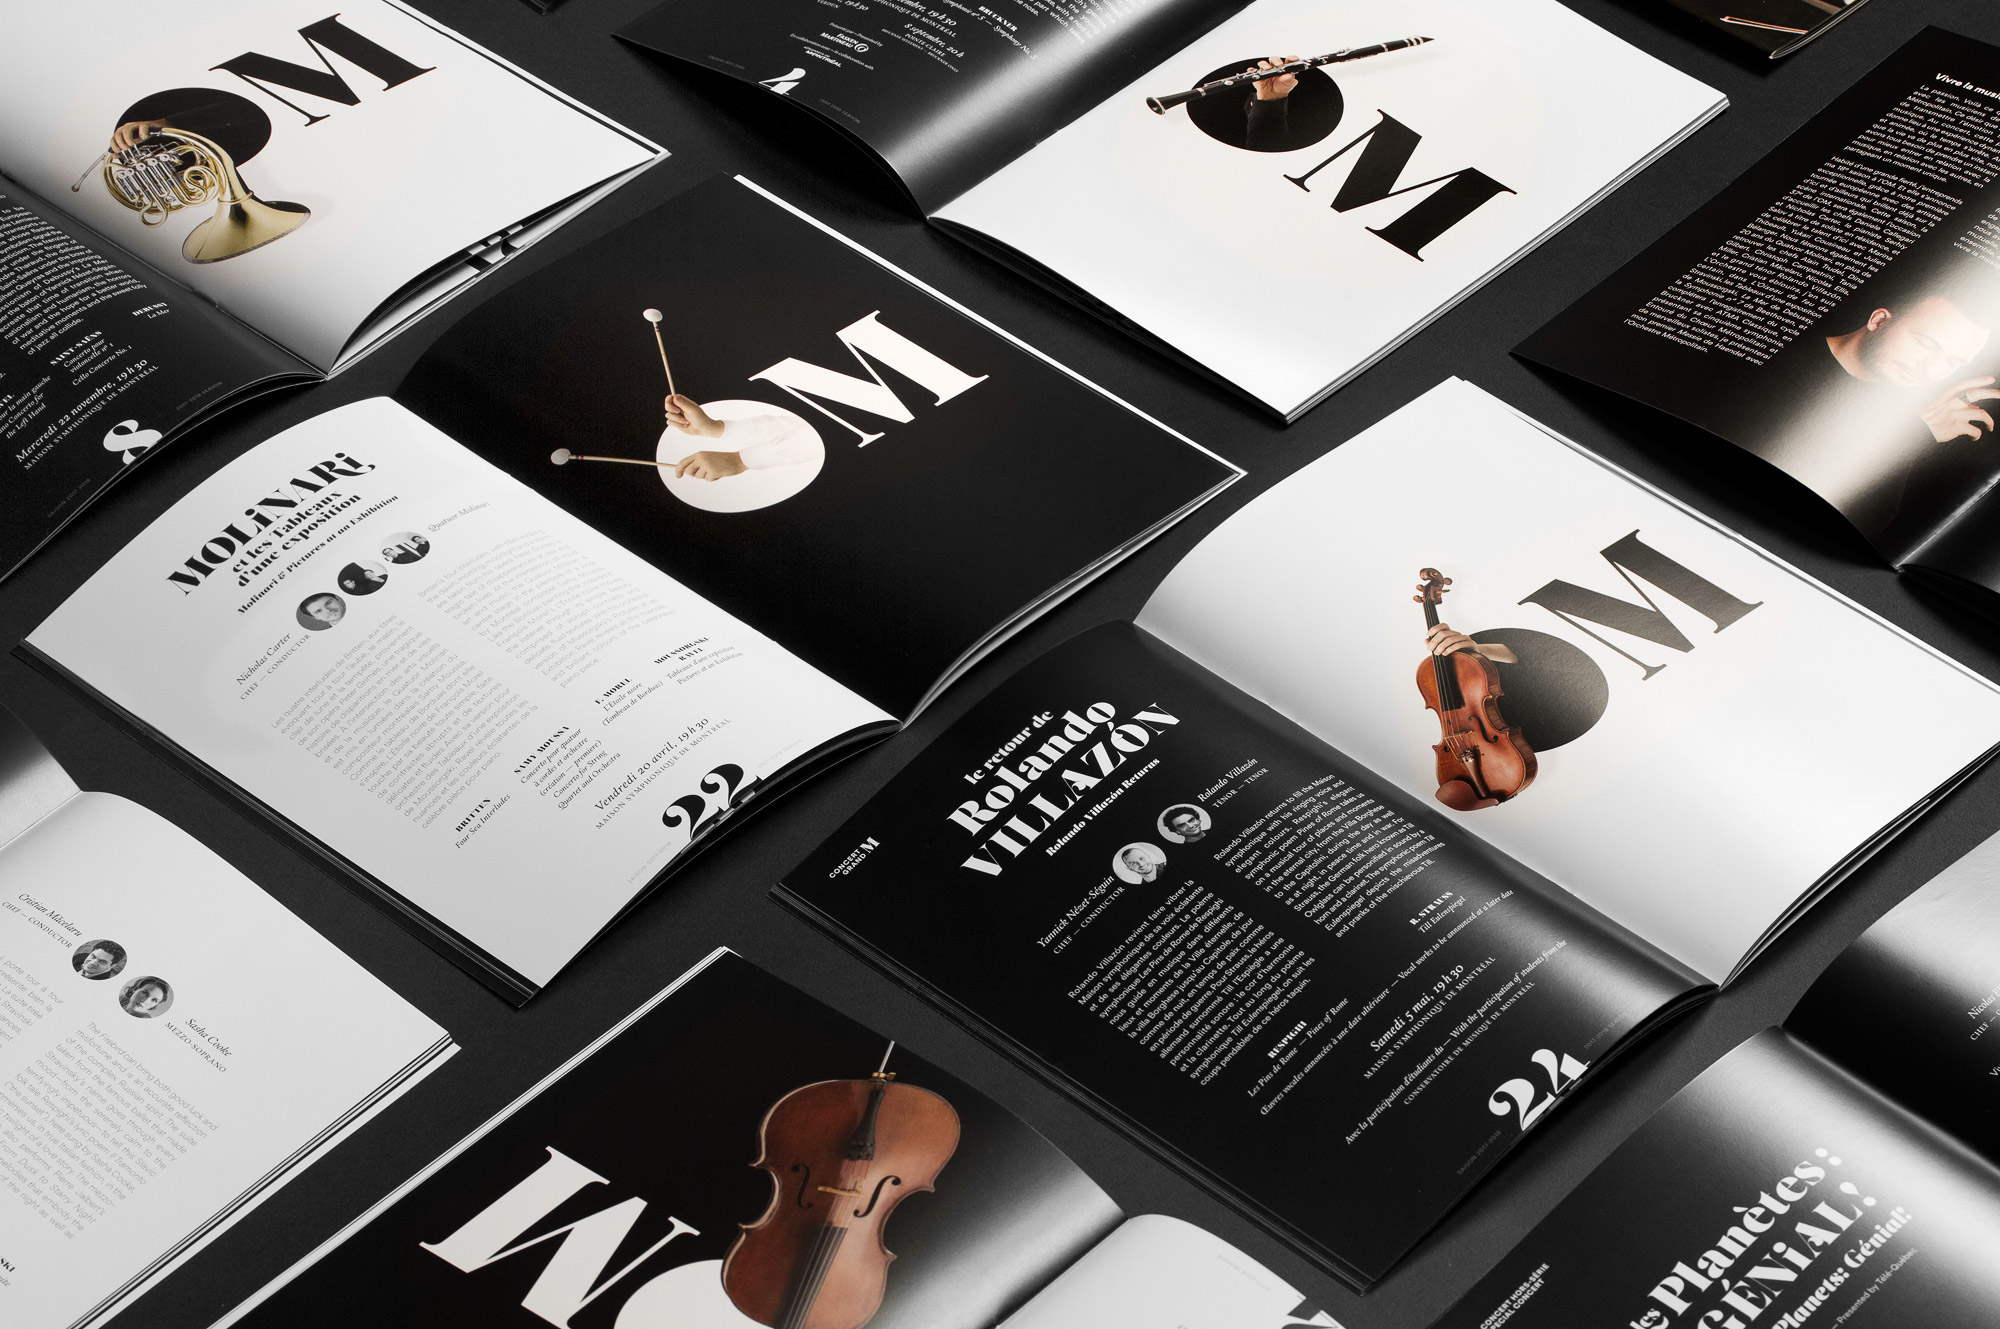 Brand Identity and Graphic Design for The Metropolitain Orchestra 